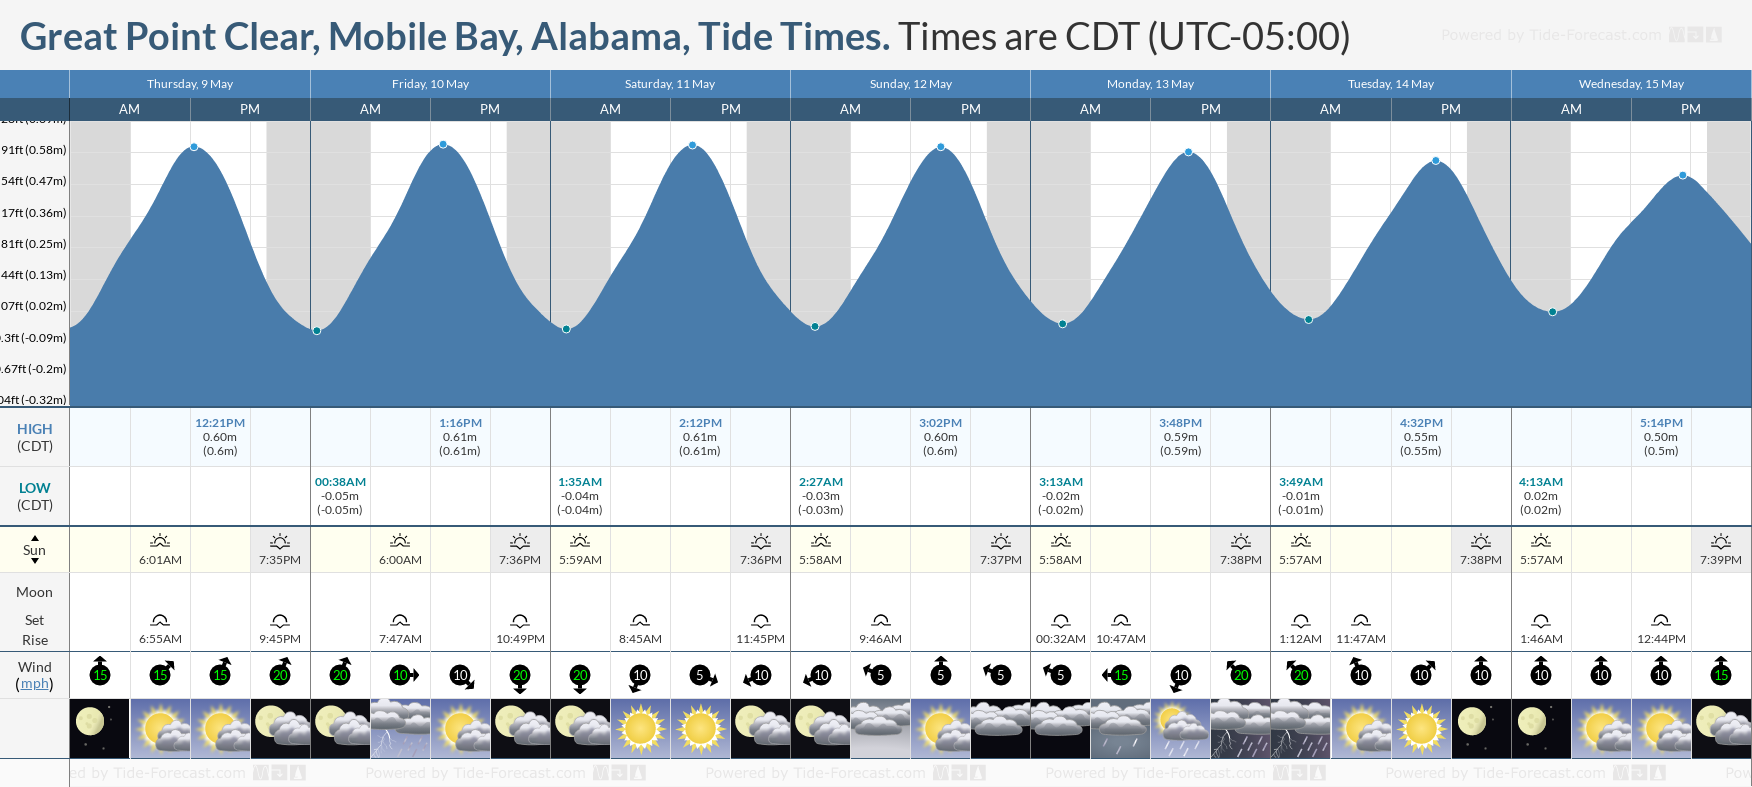 Great Point Clear, Mobile Bay, Alabama Tide Chart including high and low tide tide times for the next 7 days